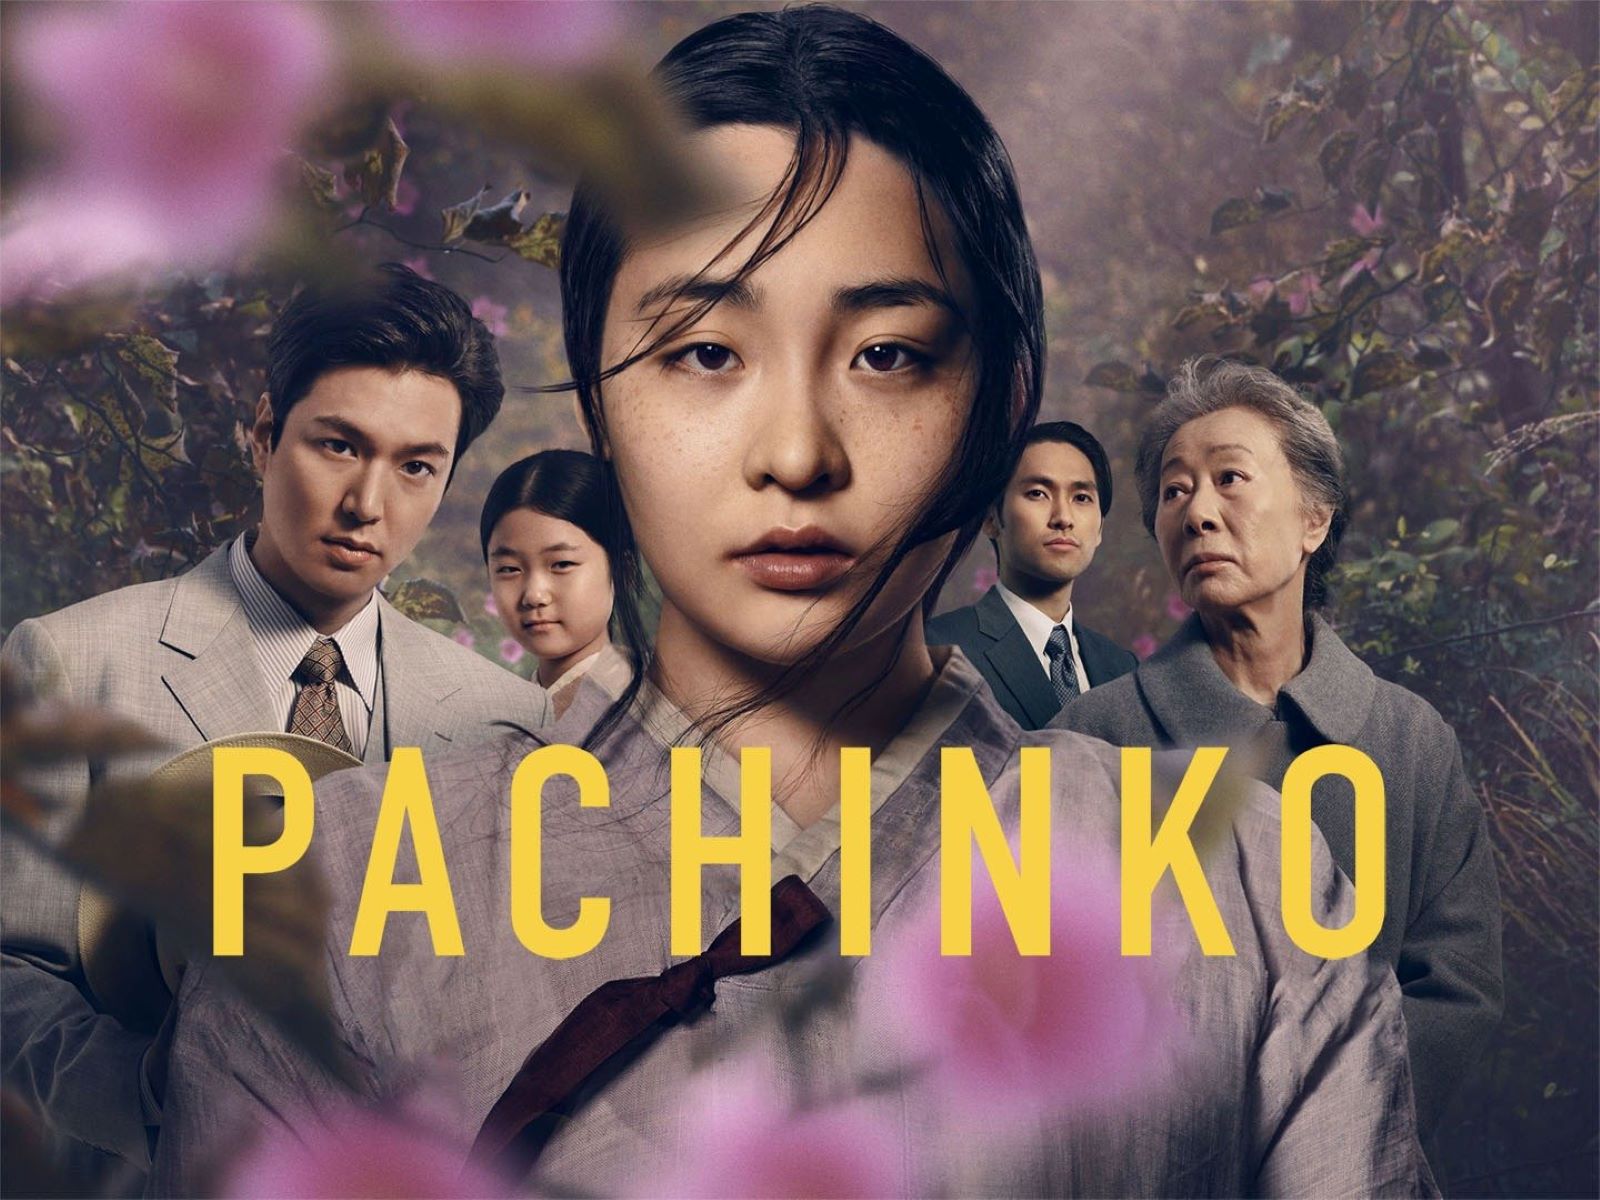 How To Watch Pachinko Without Apple TV+